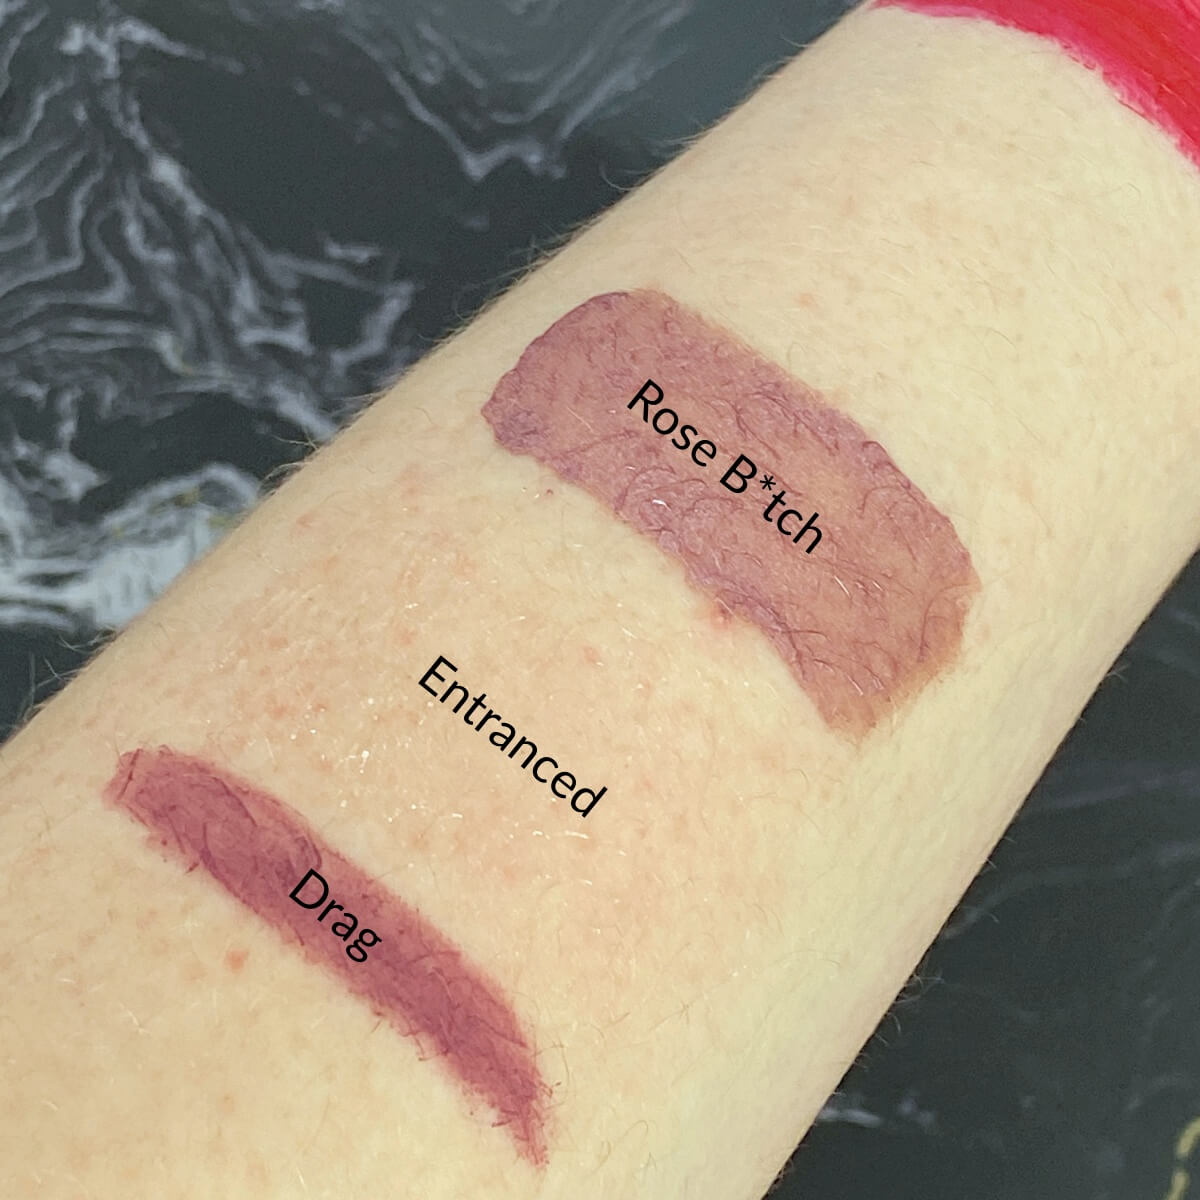 haus labs Glam Attack Liquid Shimmer Powder in Rose B-tch swatches